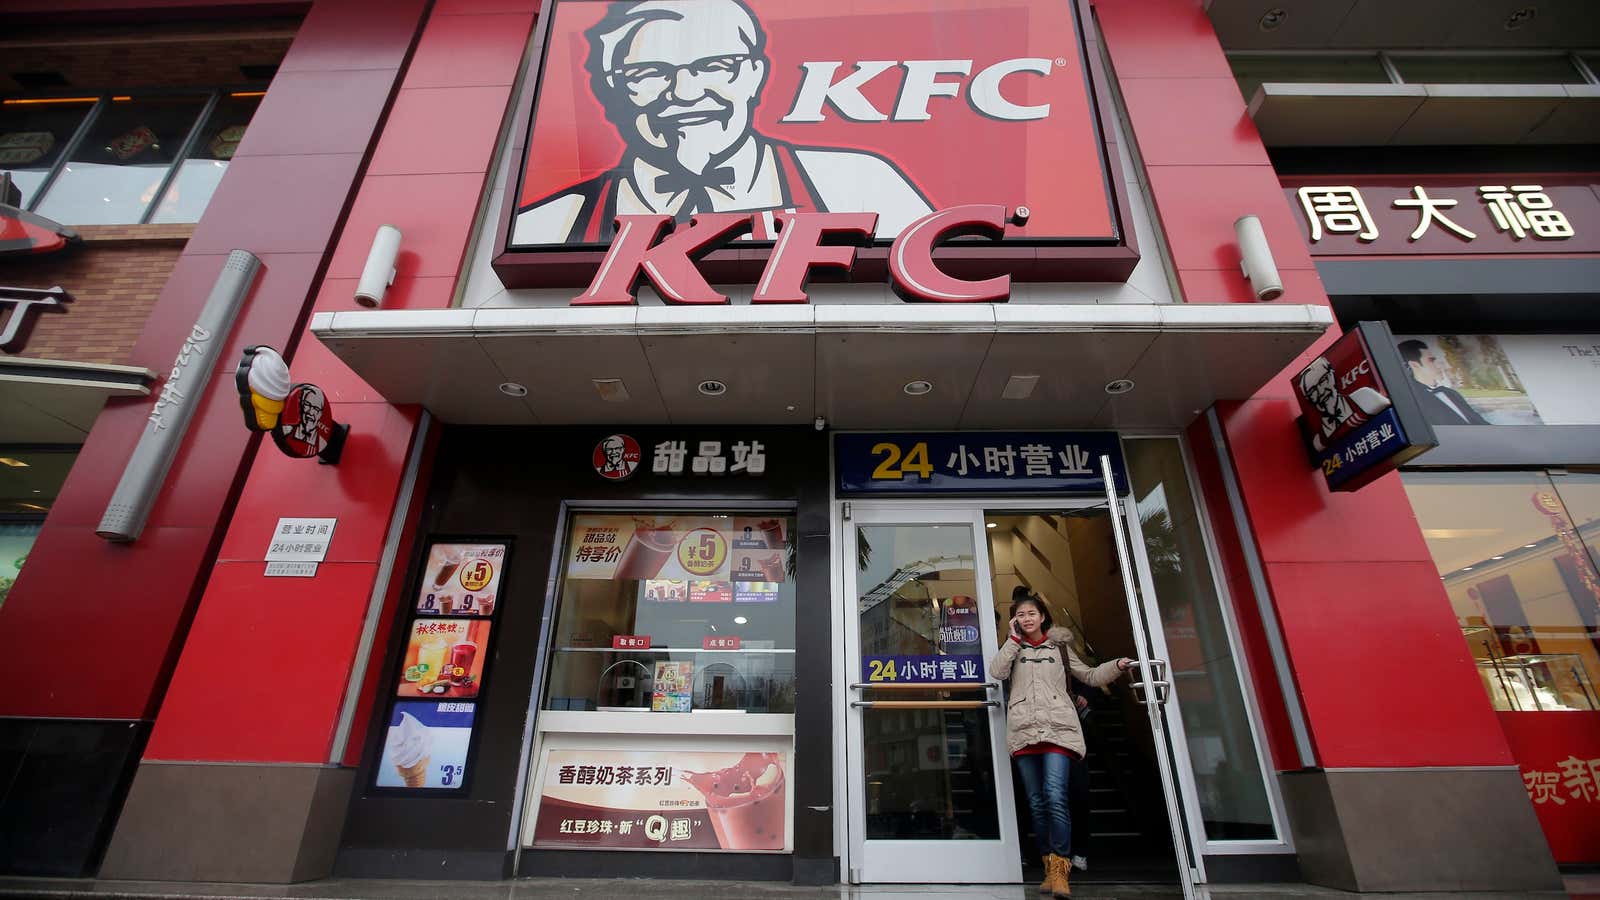 Yum Brands in China would be a logical partner.